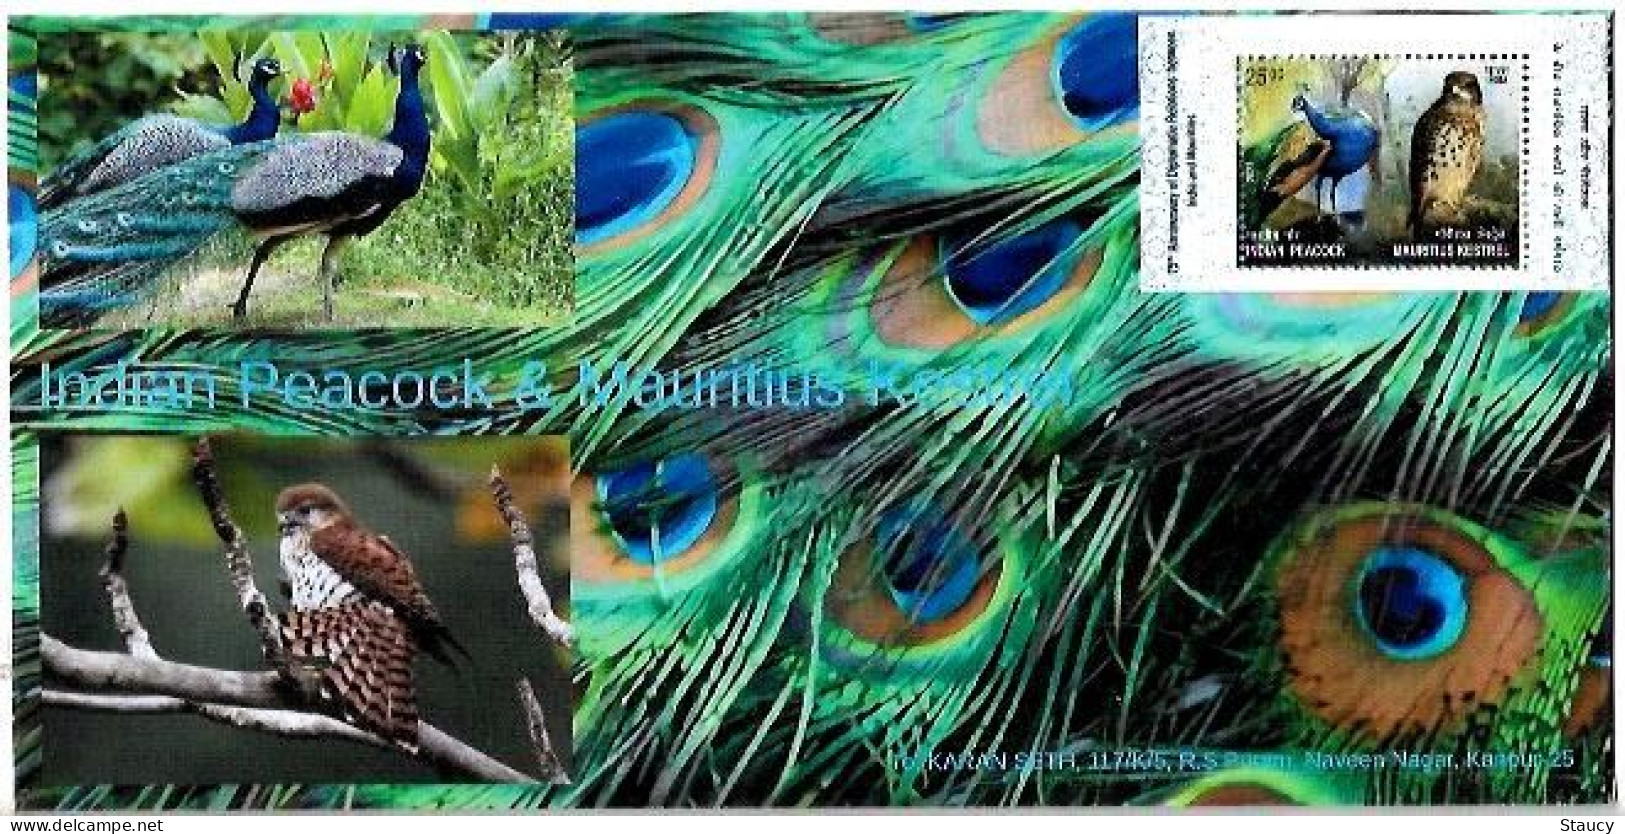 India 2023 India – Mauritius Joint Issue Souvenir Special FIRST DAY COVER FDC Only 10 Issued As Per Scan - Peacocks